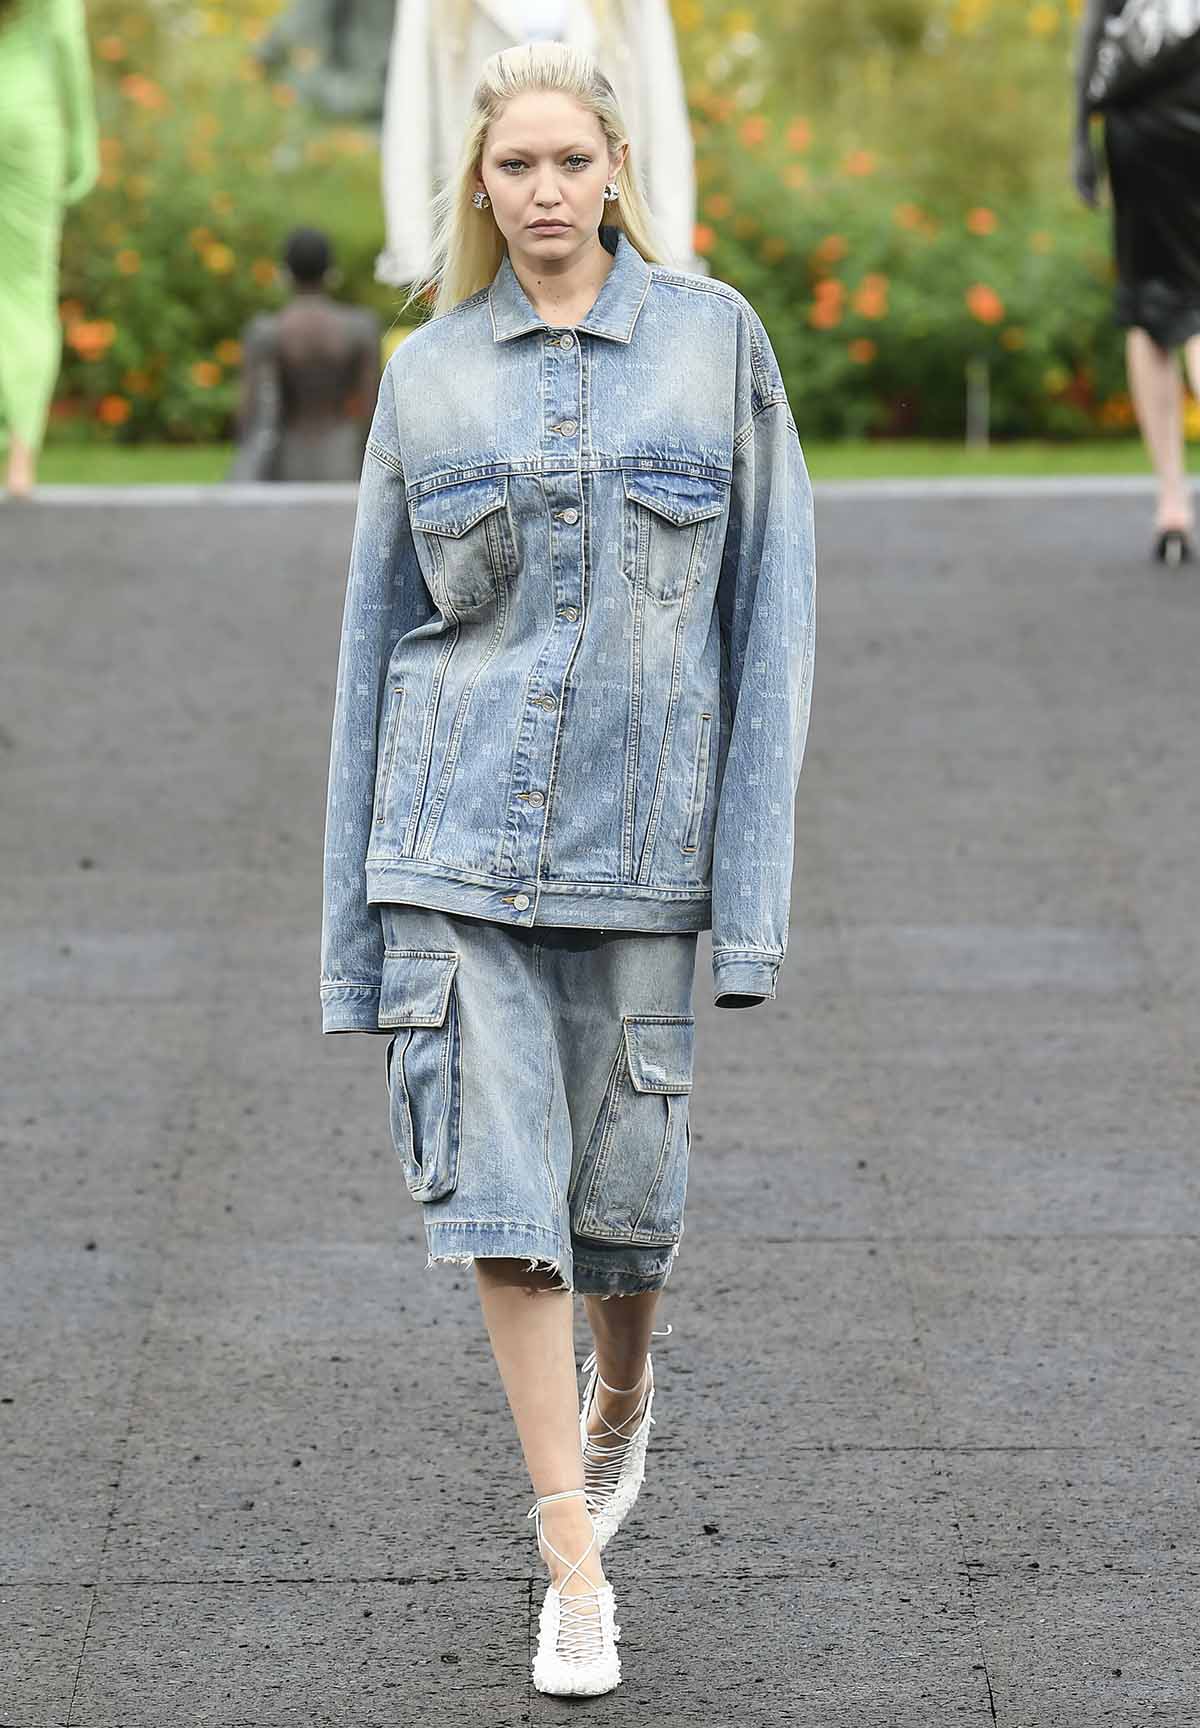 Gigi Hadid wears a denim-on-denim jacket and shorts outfit with bleached eyebrows and white lace-up heels at Givenchy's SS23 runway